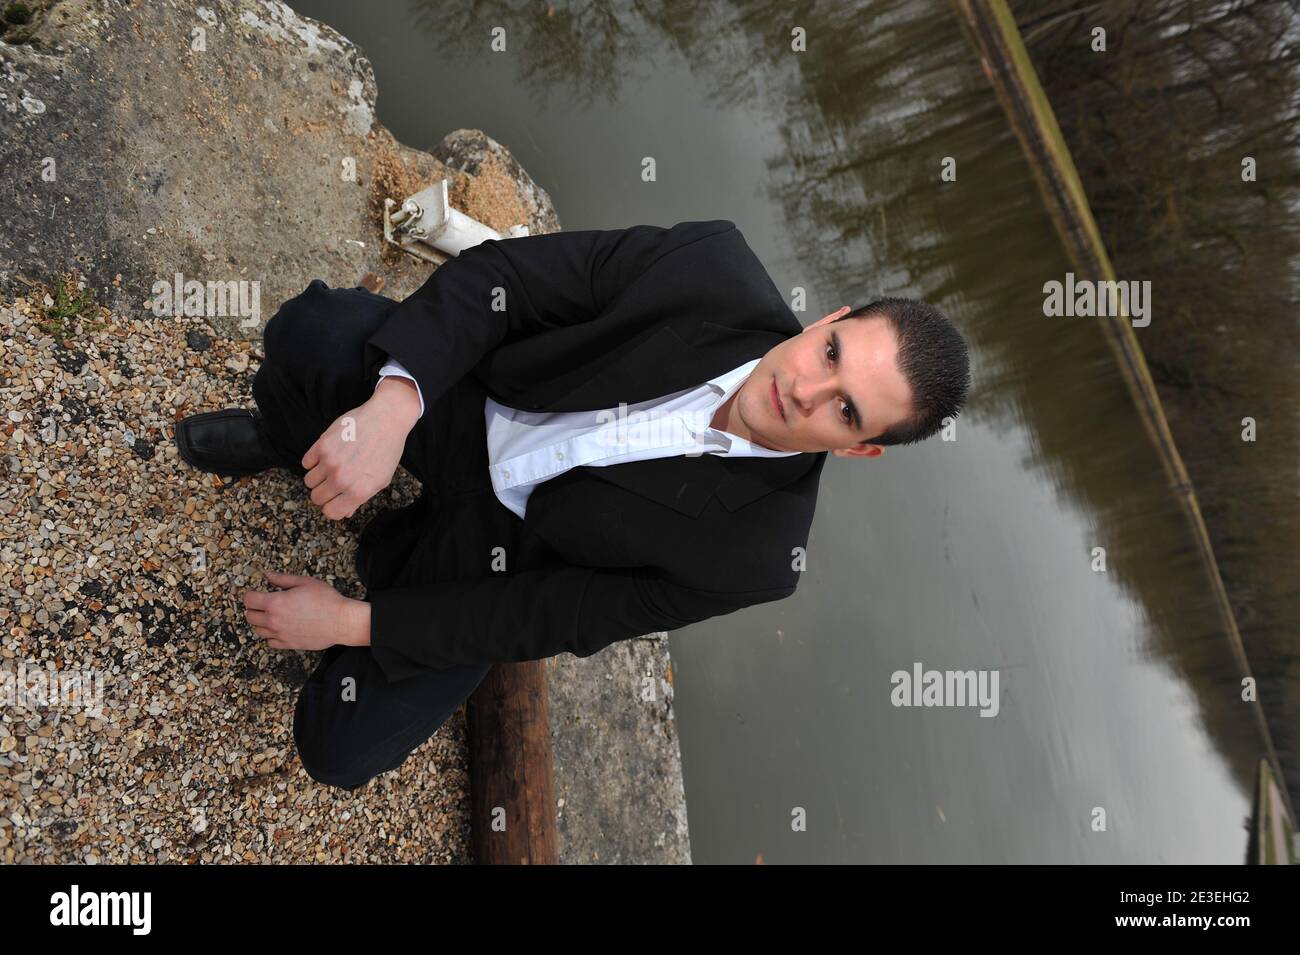 French singer Damien Jean is the new buzz on internet. He poses in his  village, Souppes sur Loing, France, on January 28, 2009. Photo by Nicolas  Gouhier/ABACAPRESS.COM Stock Photo - Alamy